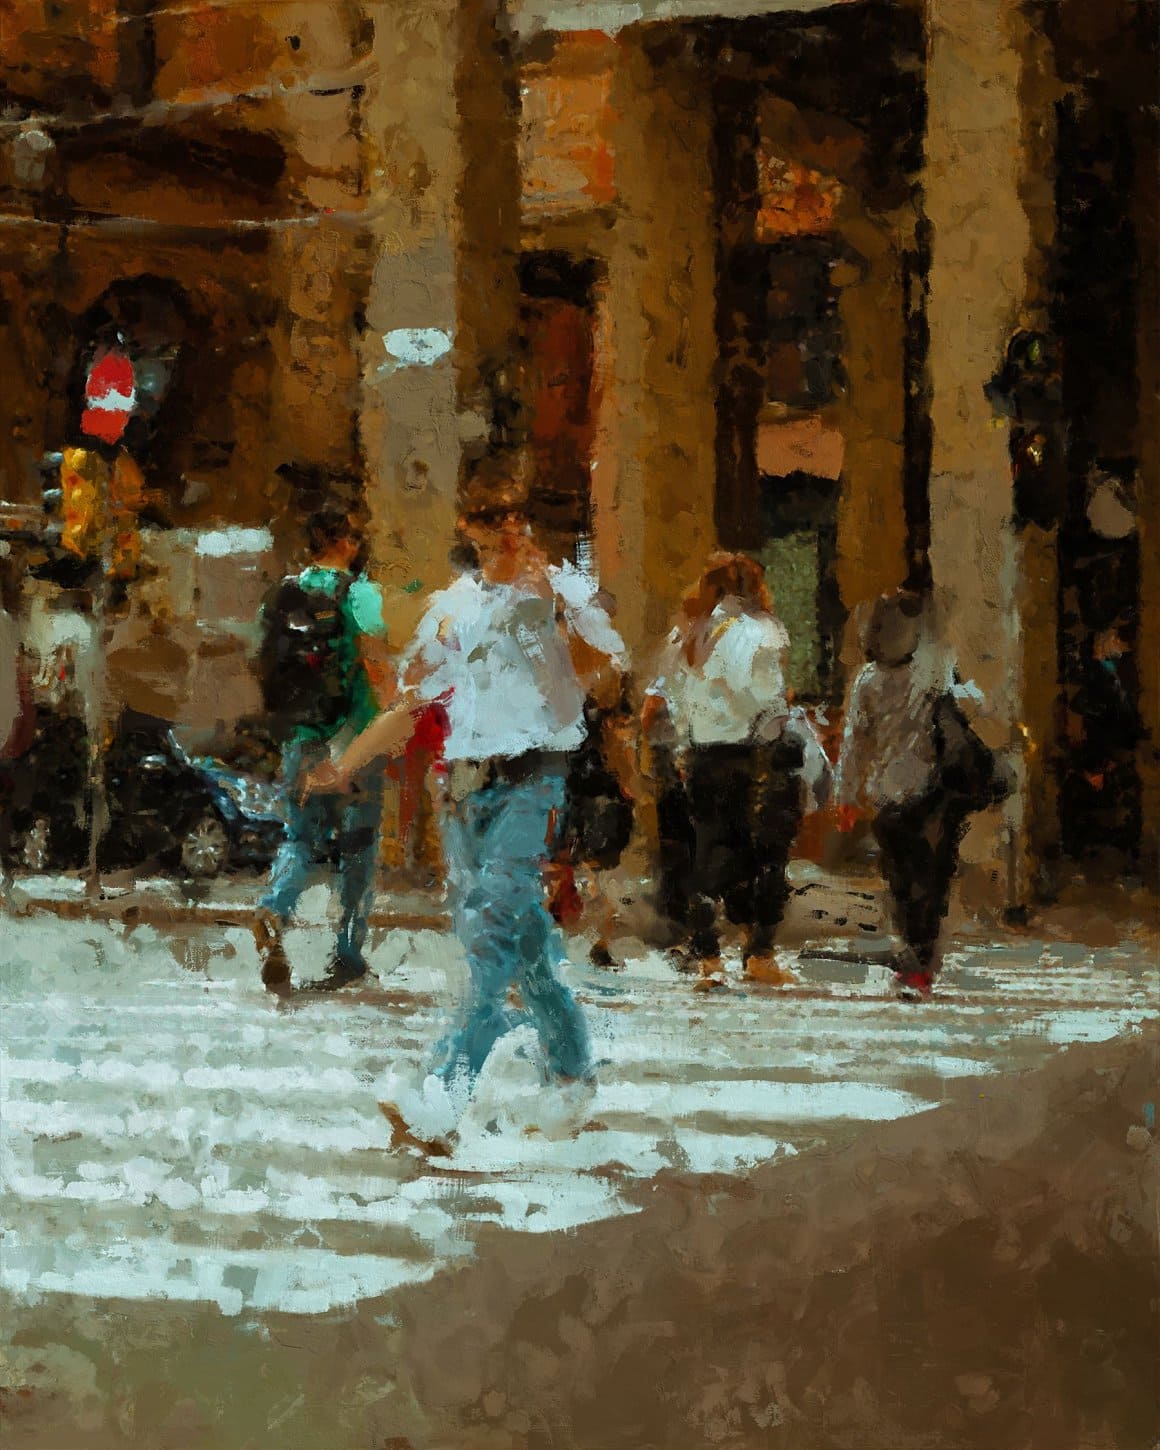 Image of pedestrian crossing using Painted Photoshop Effect.